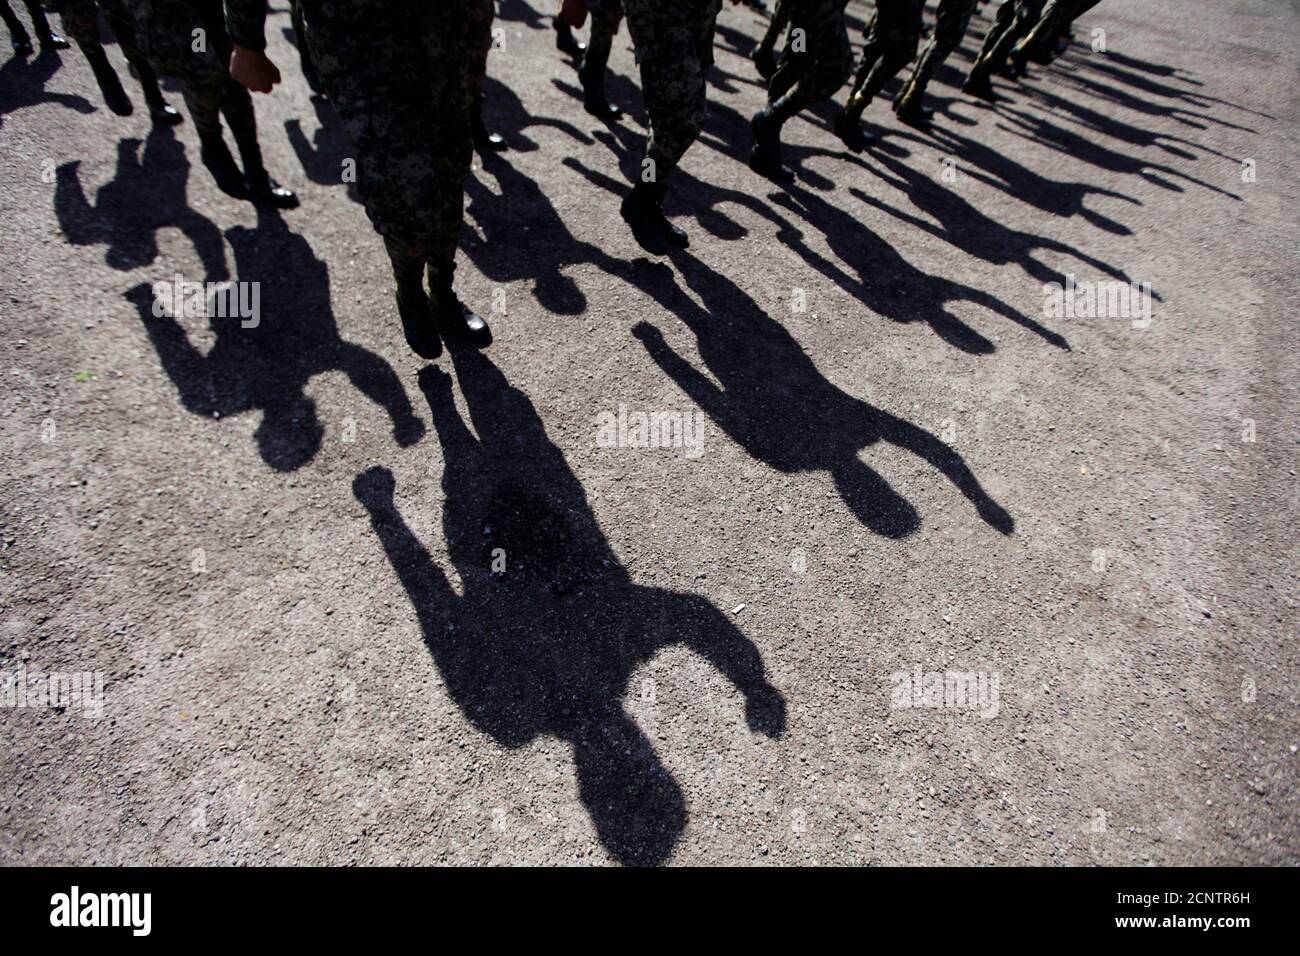 Members of the armed forces who form part of a new military police for public order (PMOP) cast their shadows on the ground during a media presentation in Tamara, on the outskirts of Tegucigalpa September 6, 2013. Honduras' congress has approved a new military police unit of 5,000 troops who will be in charge of police operations, public order and safety, according to local media.     REUTERS/Jorge Cabrera (HONDURAS - Tags: CRIME LAW MILITARY TPX IMAGES OF THE DAY) Stock Photo